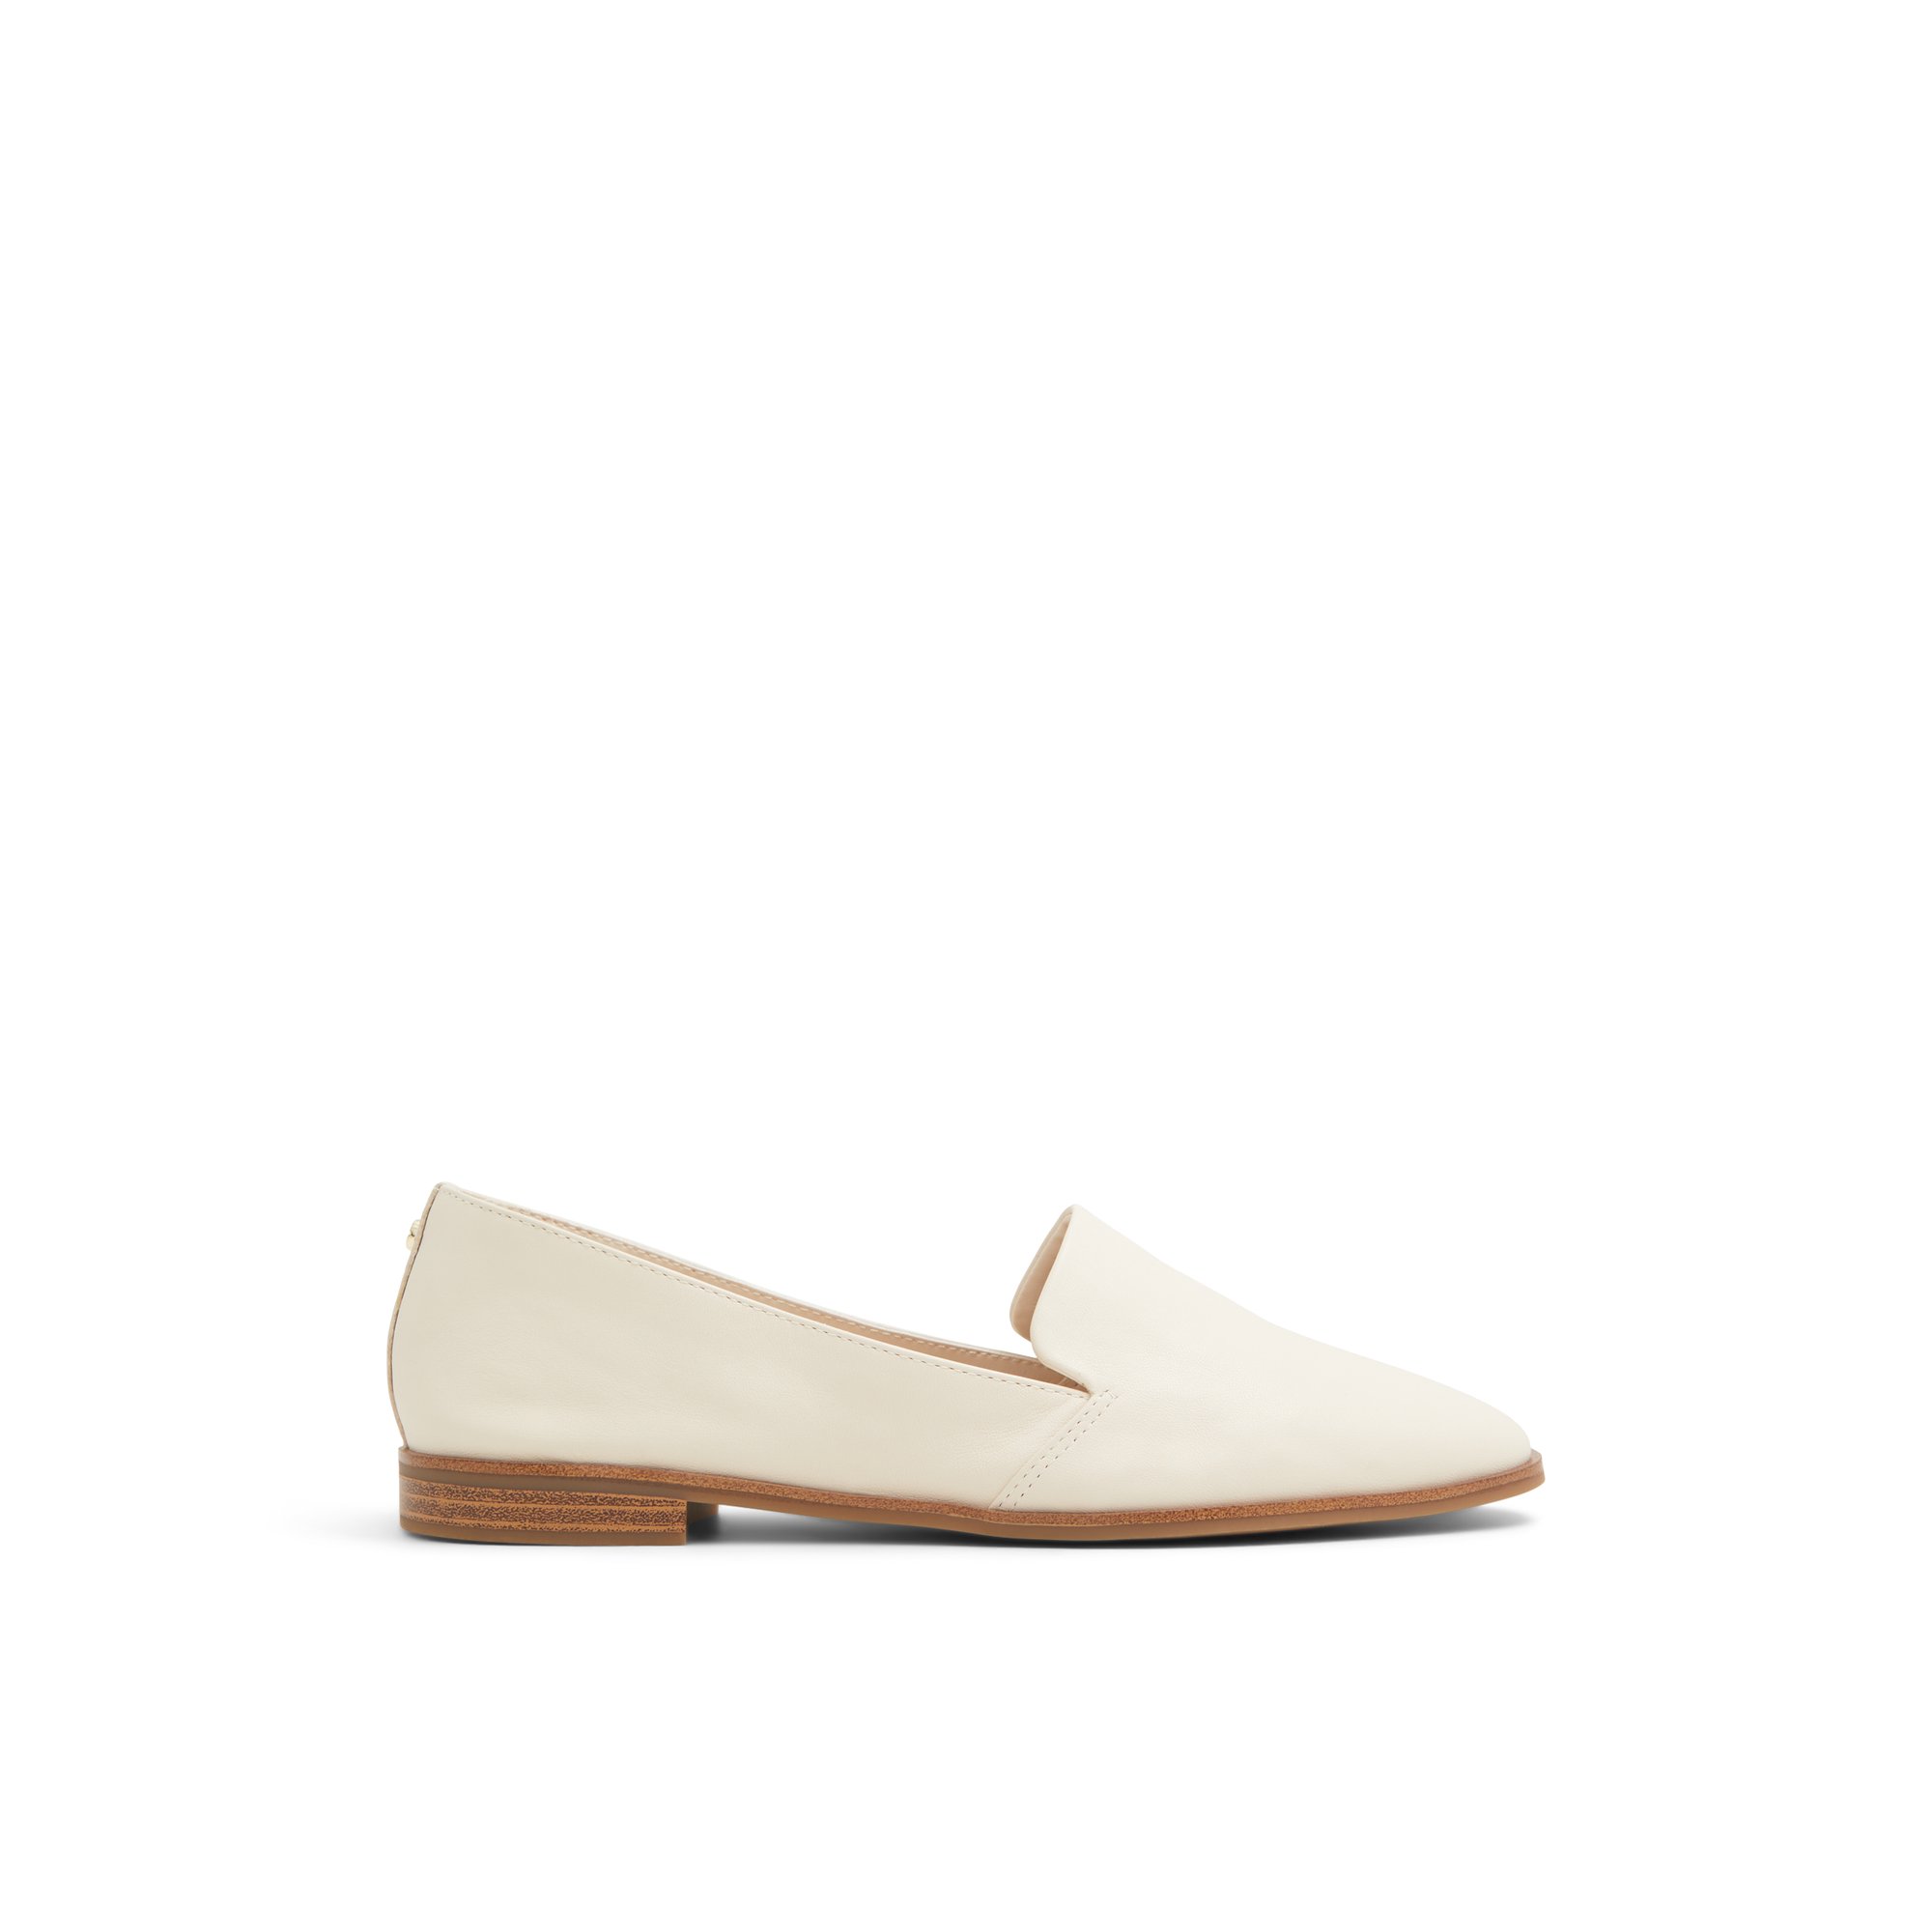 Luca Ferri Meraena - Women's Footwear Shoes Flats Oxfords and Loafers